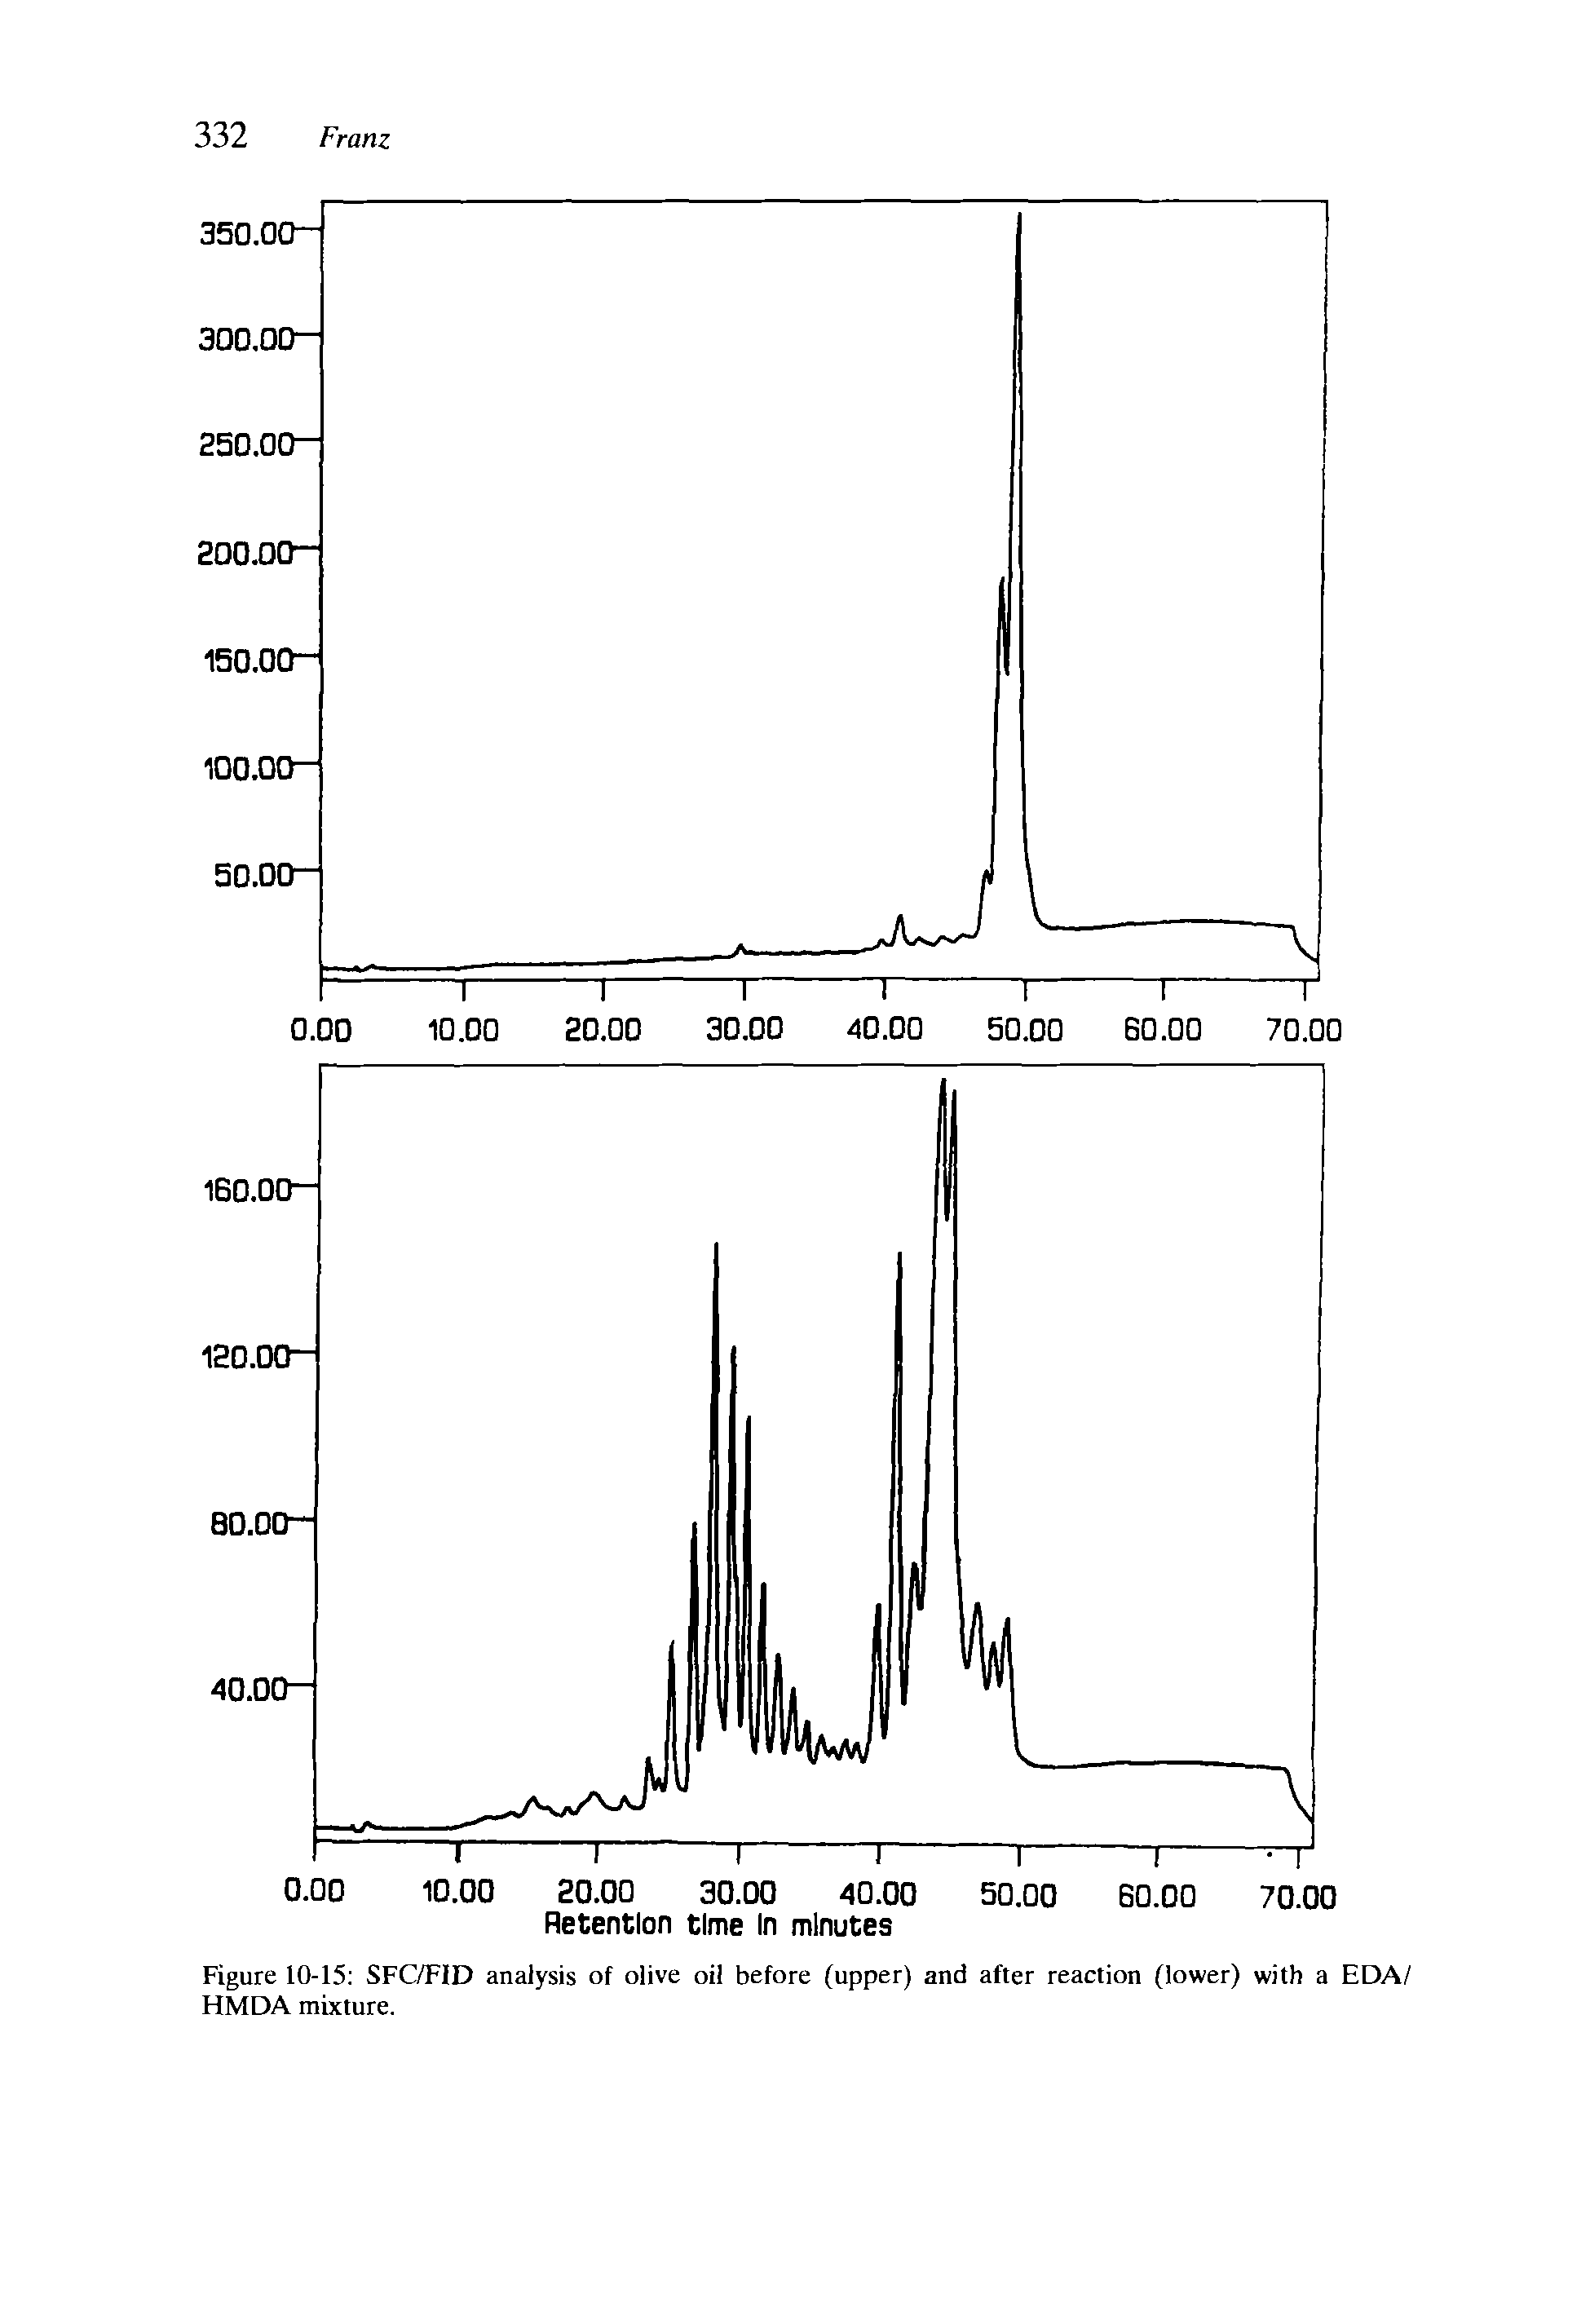 Figure 10-15 SFC/F1D analysis of olive oil before (upper) and after reaction (lower) with a EDA/ HMDA mixture.